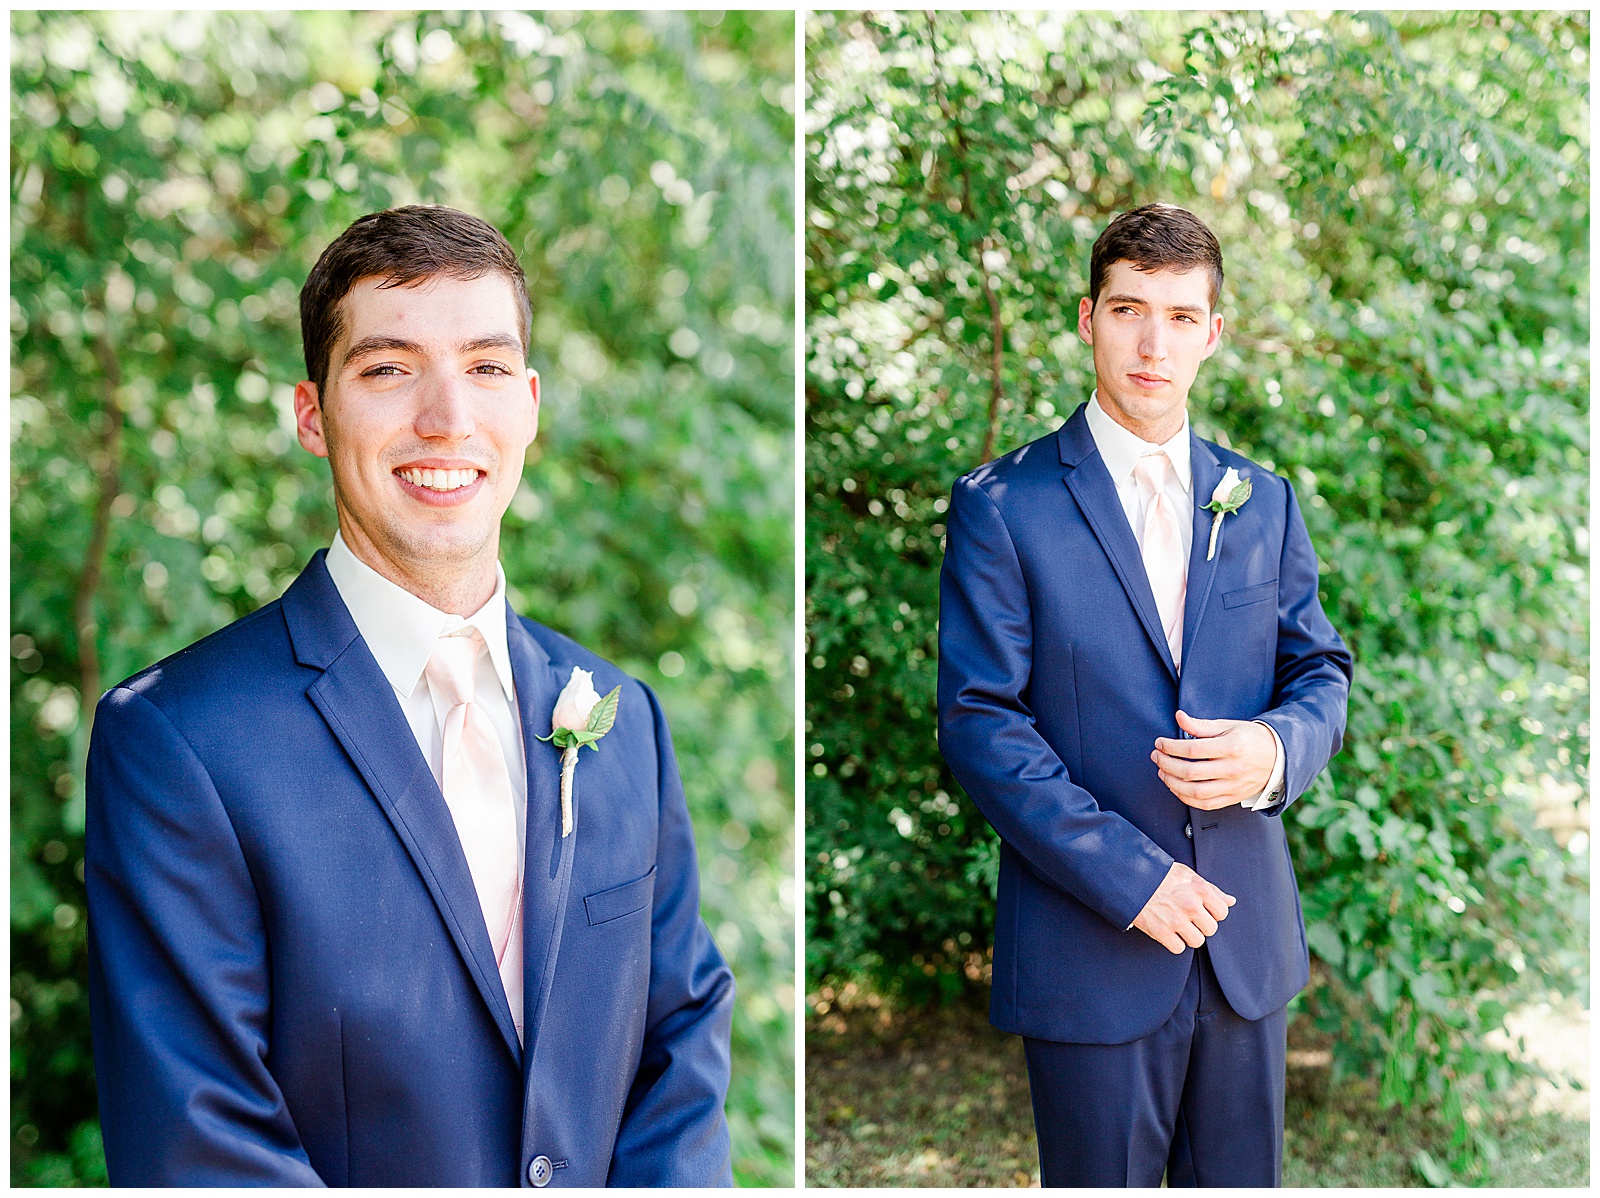 Groom Photo in Blue Suit from Summer Wedding in Charlotte, NC | Check out the full wedding at KevynDixonPhoto.com